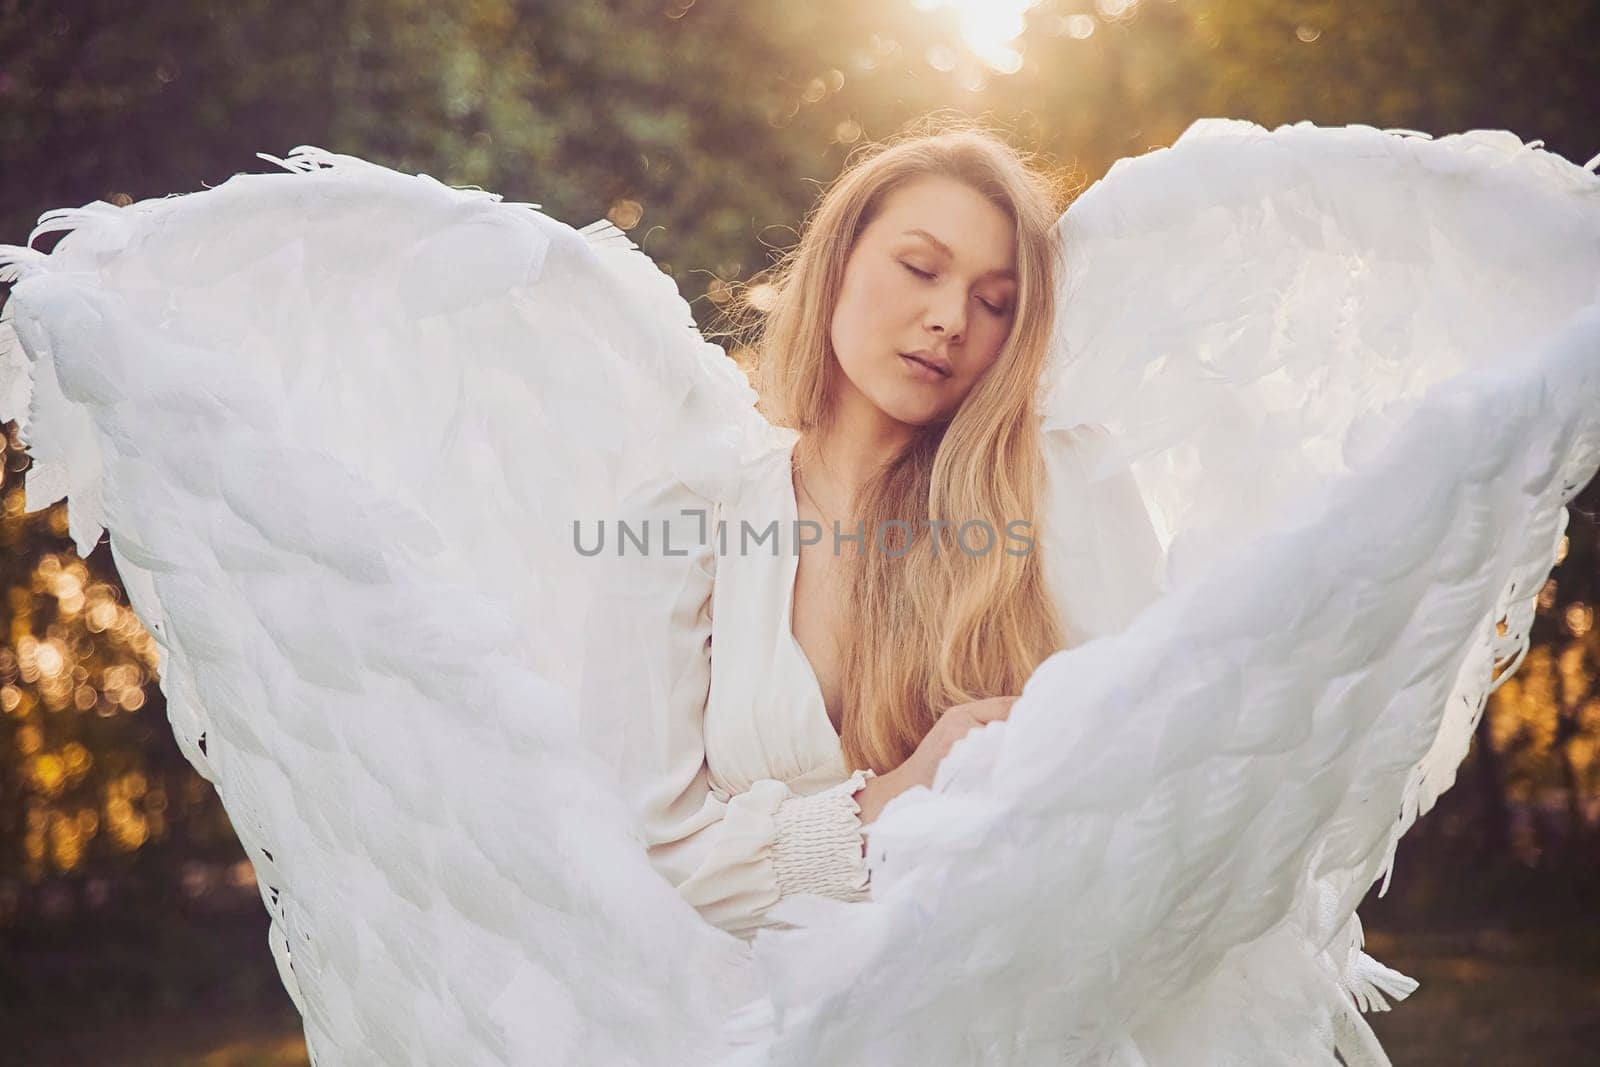 Beautiful girl dressed as an angel in the evening garden.